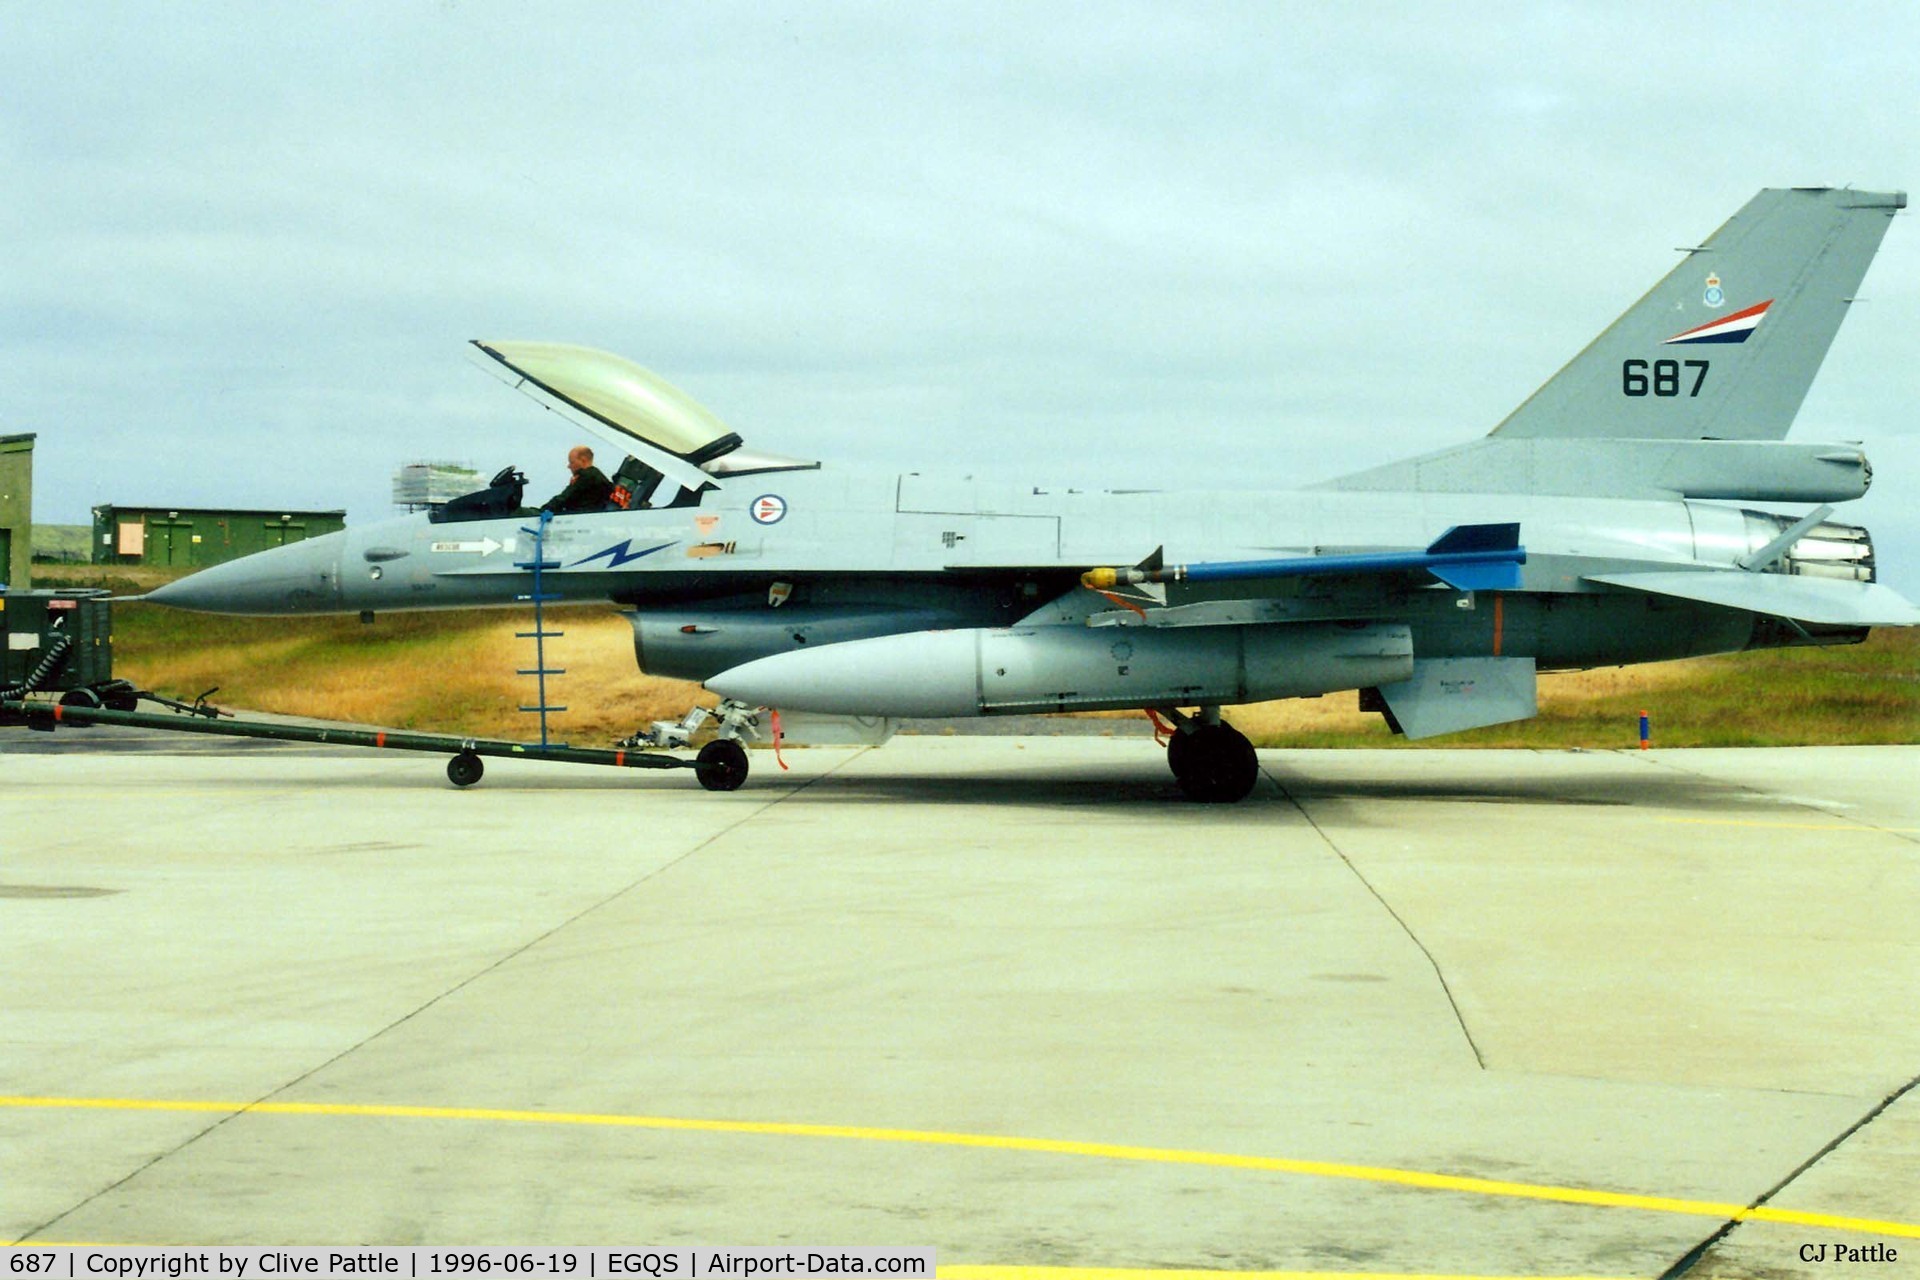 687, 1980 General Dynamics F-16AM Fighting Falcon C/N 6K-59, Scanned from print. RNoAF F-16AM '687' of RNoAF 331 Skv pictured on detachment to RAF Lossiemouth in the summer of '96